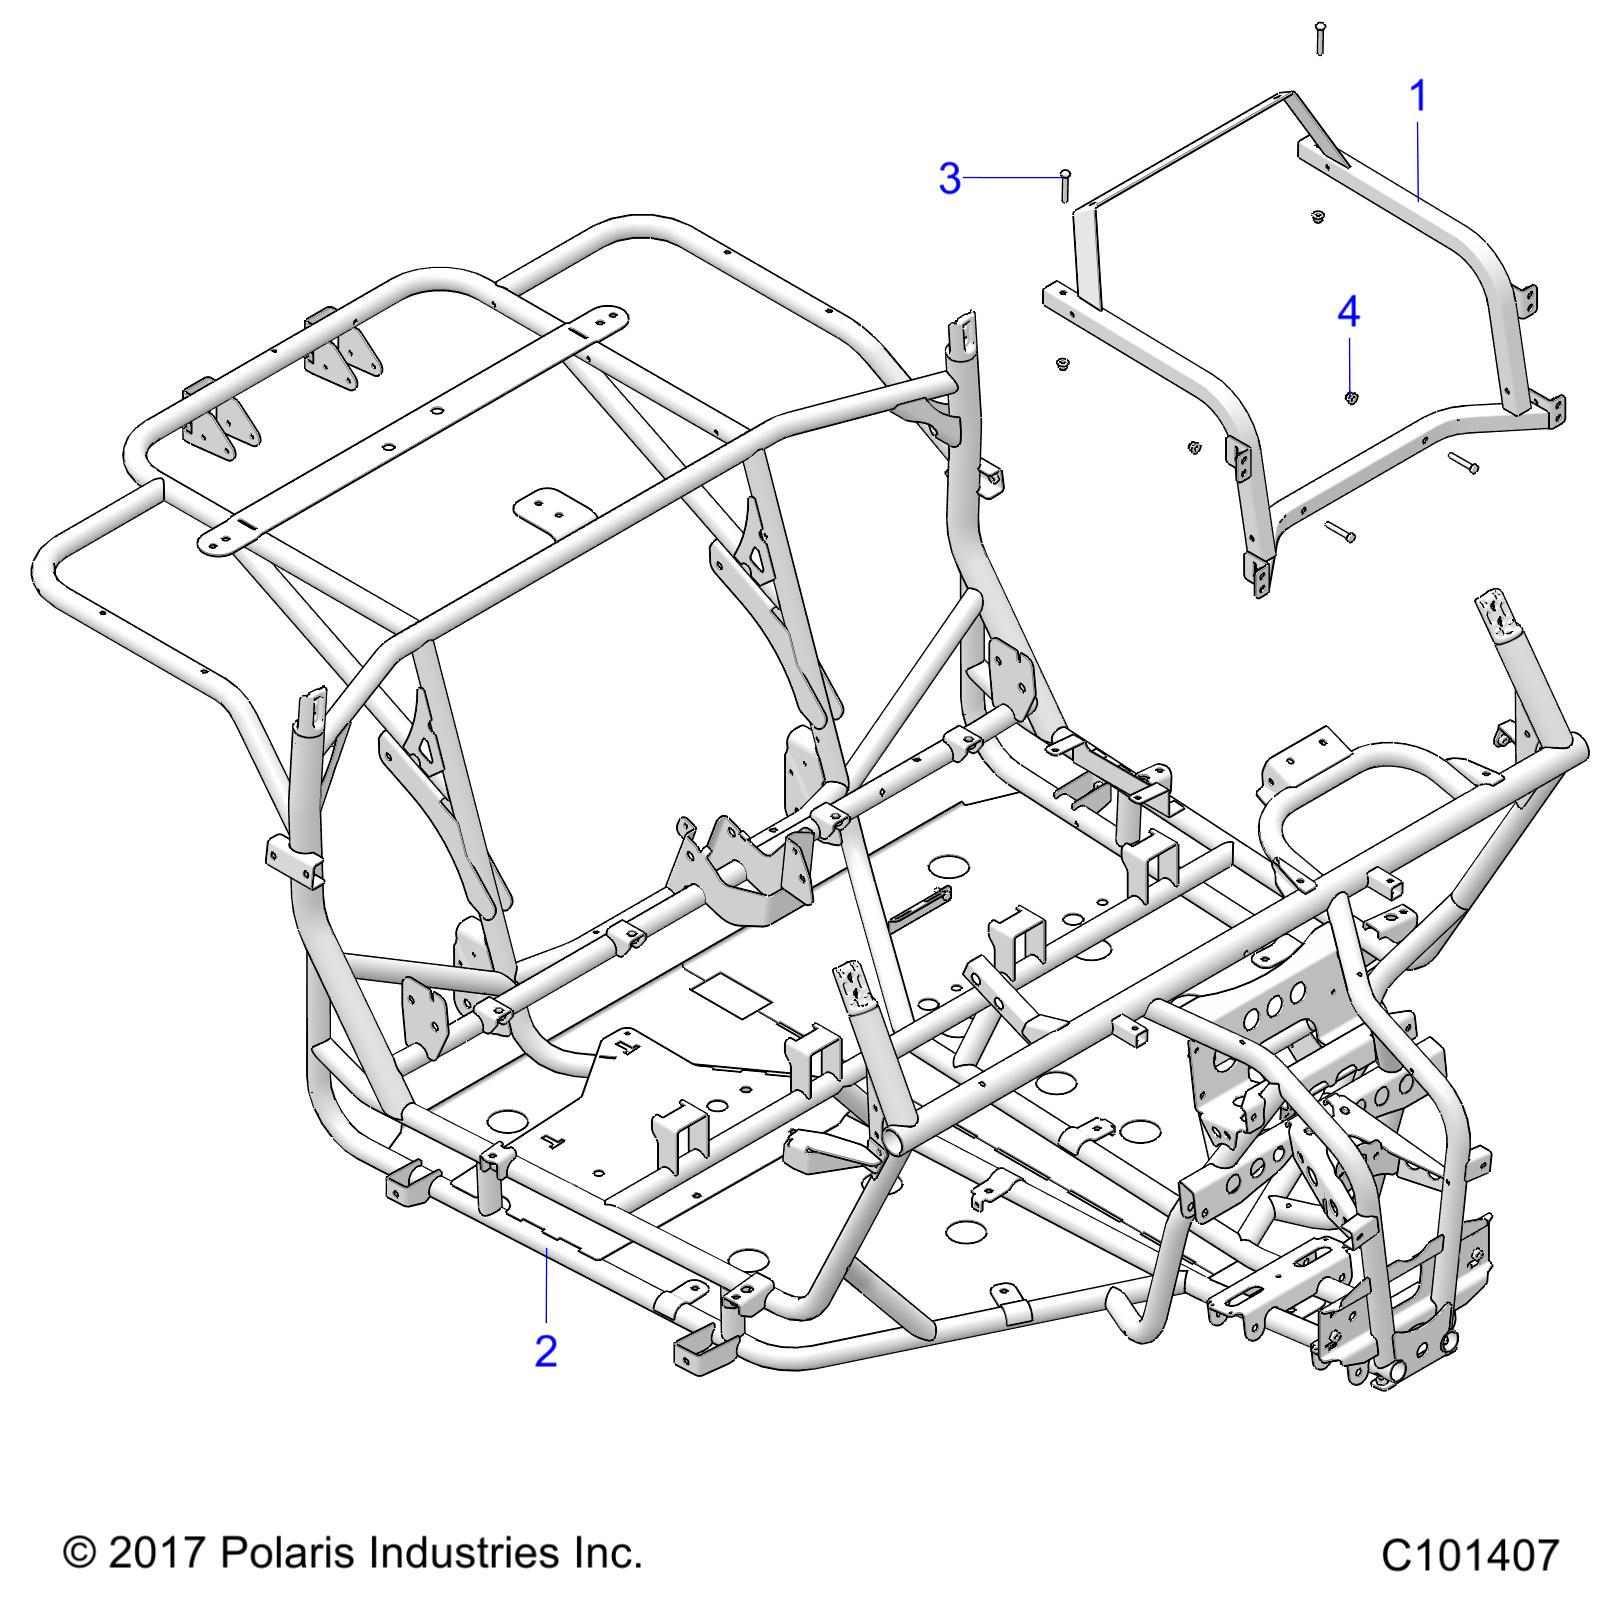 CHASSIS, MAIN FRAME - A19HZA15A1/A7/B1/B7 (C101407)